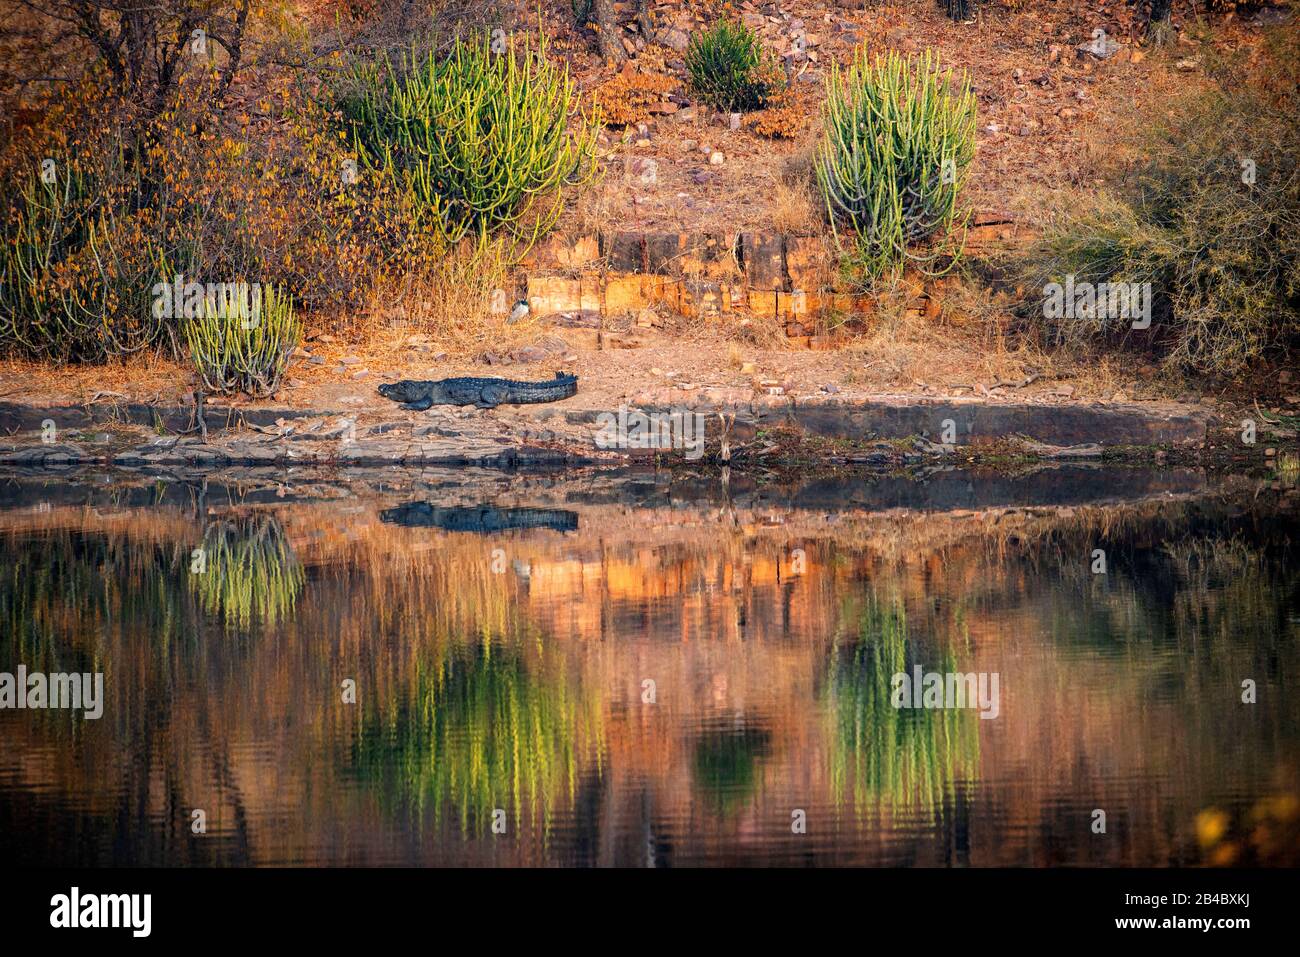 Mugger Crocodile [Crocodylus palustris] or indian Marsh Crocodile resting on the waters edge, Ranthambore National Park, India. This is one of the exc Stock Photo